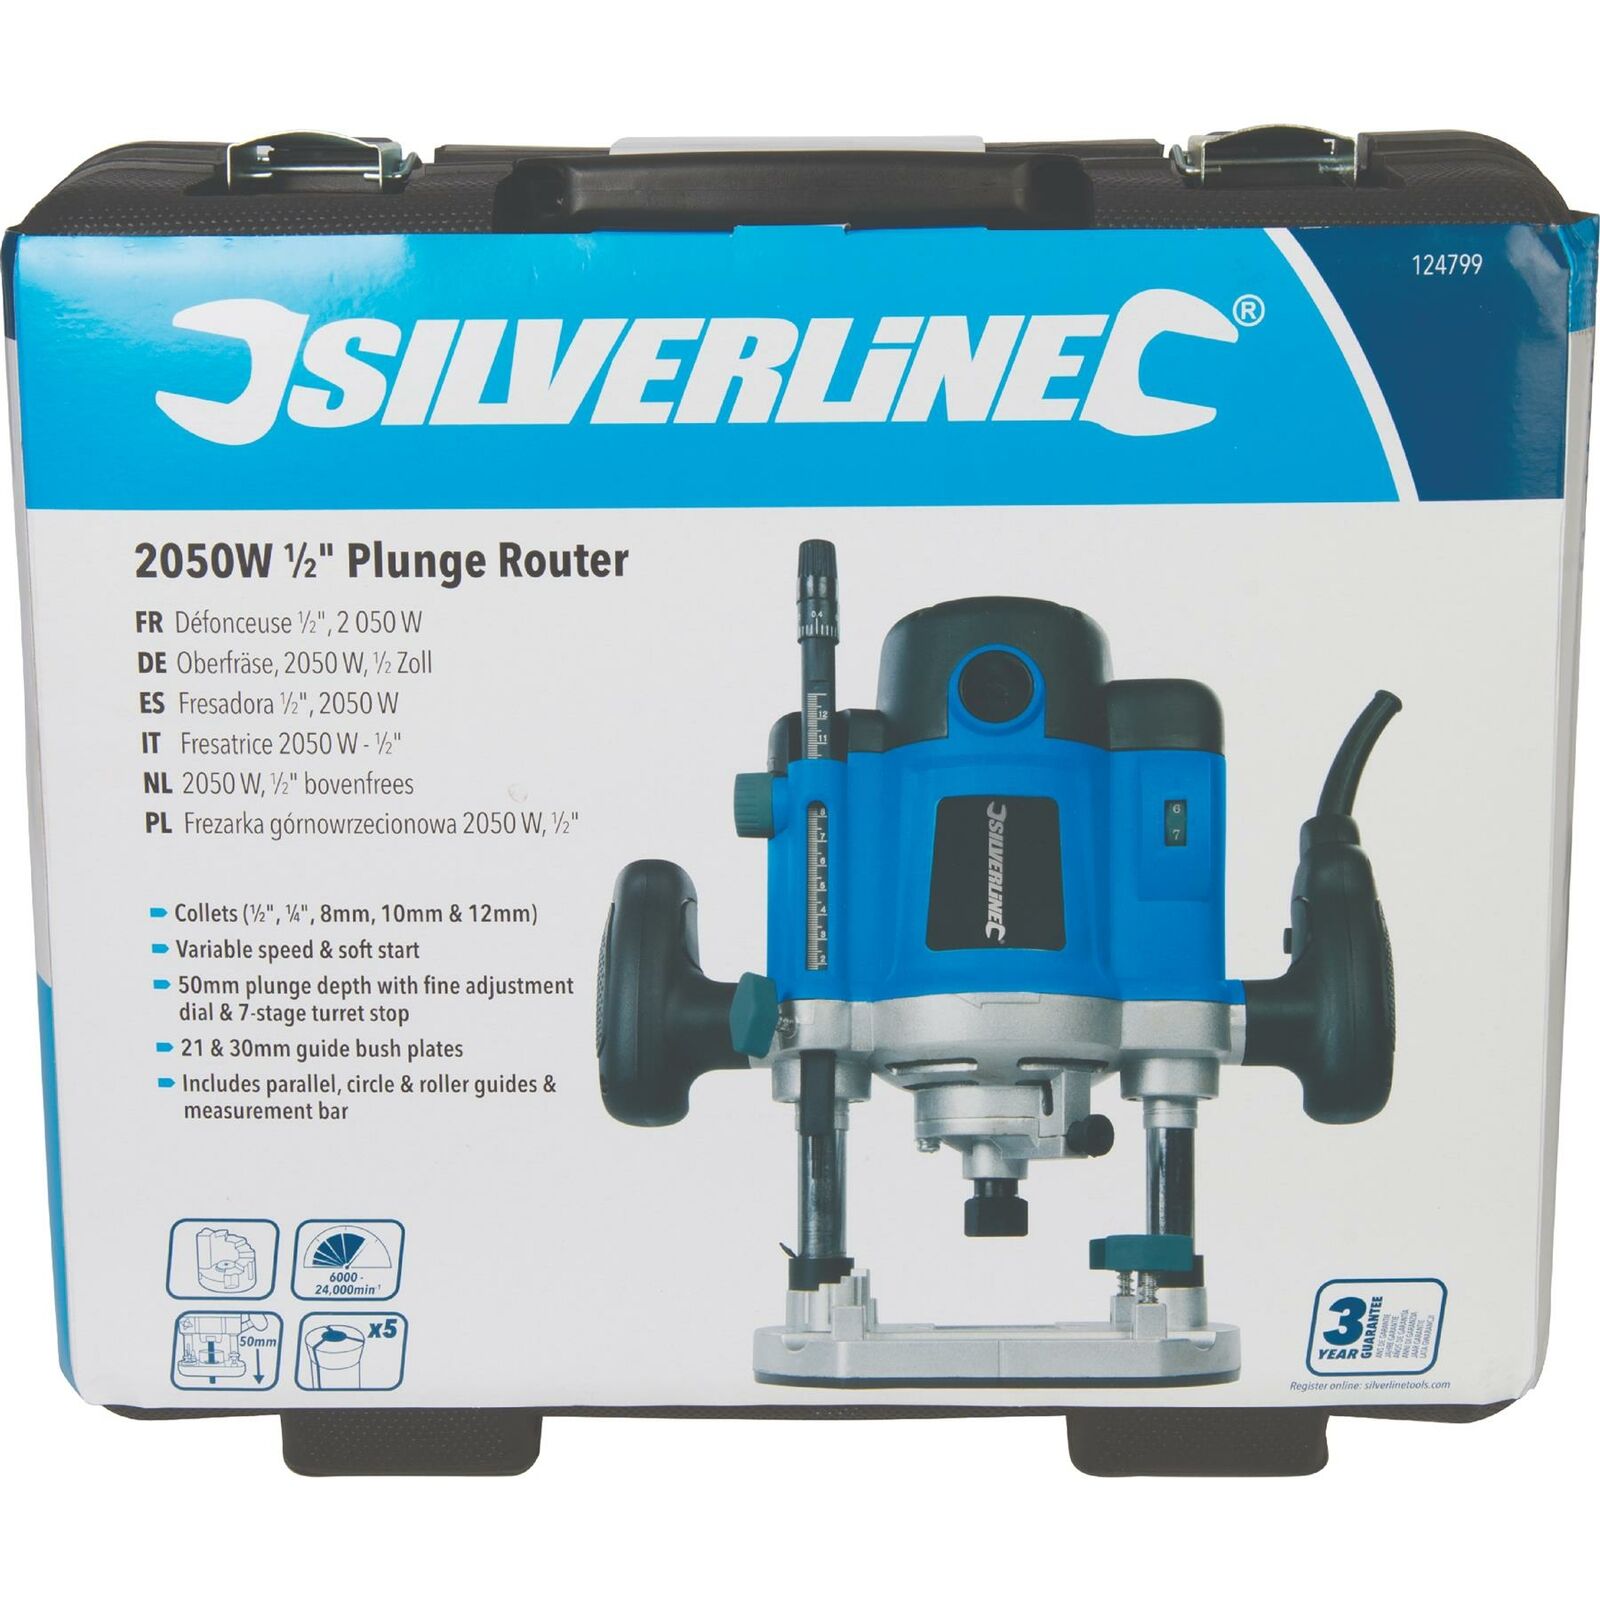 Silverline 2050W Electric Woodworking DIY Plunge Router Cutter Power Tool 1/2"